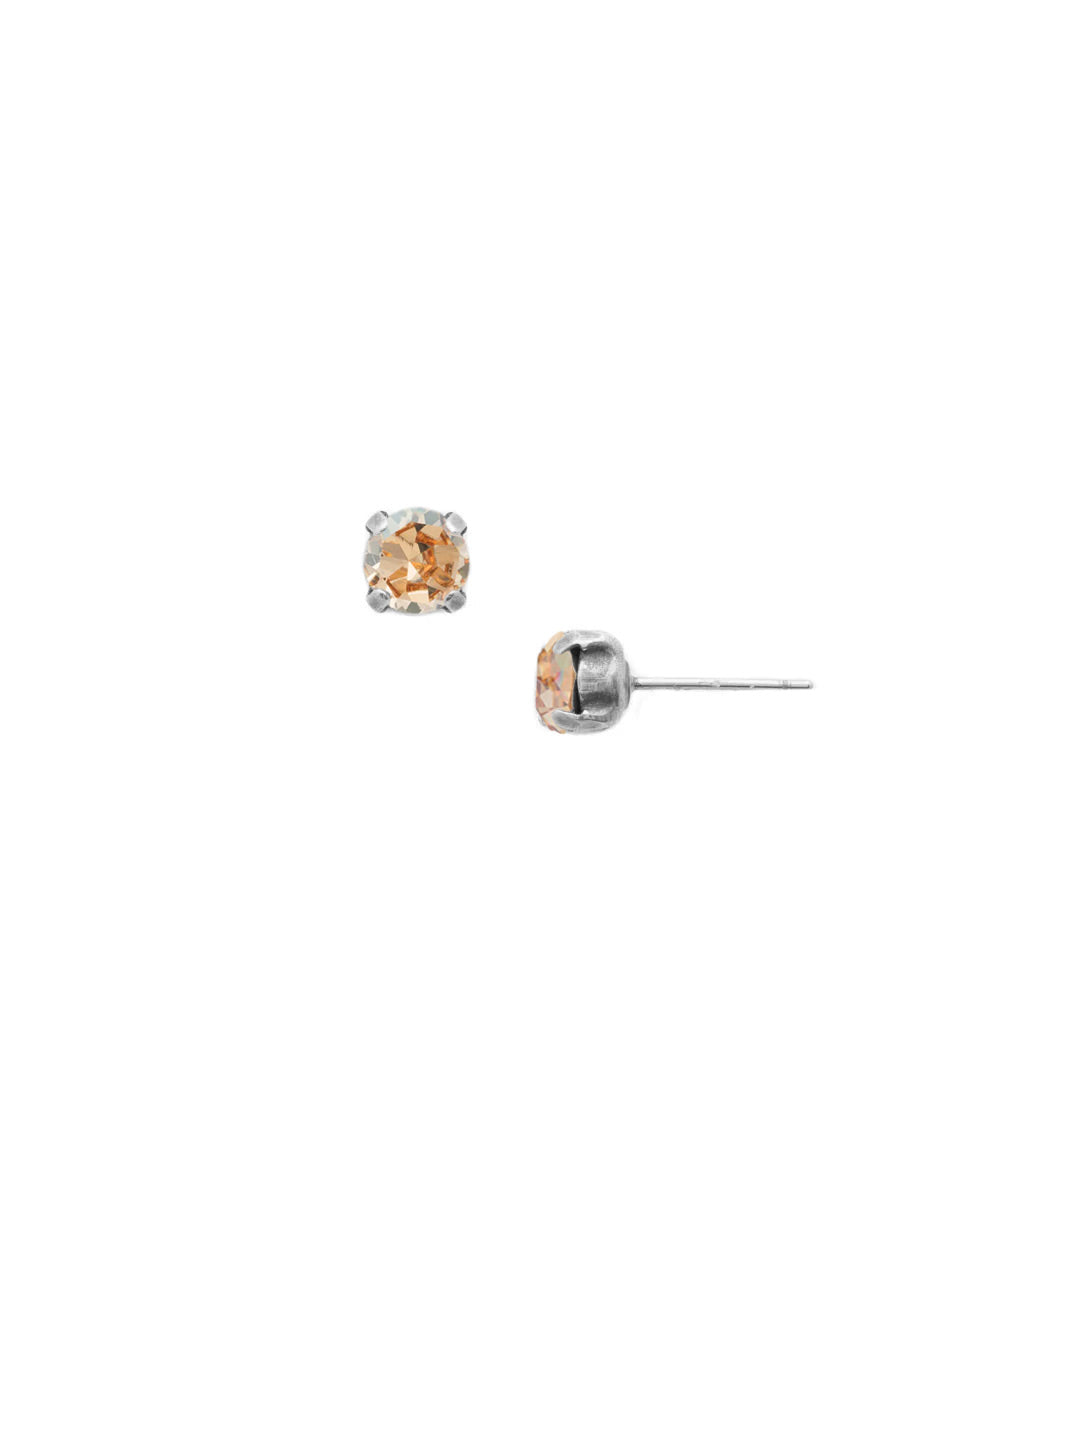 Jayda Stud Earrings - EDN32ASDCH - <p>The Jayda Stud Earrings are the perfect every day wardrobe staple. A round crystal nestles perfectly in a metal plated post with four prongs. </p><p>Need help picking a stud? <a href="https://www.sorrelli.com/blogs/sisterhood/round-stud-earrings-101-a-rundown-of-sizes-styles-and-sparkle">Check out our size guide!</a> From Sorrelli's Dark Champagne collection in our Antique Silver-tone finish.</p>